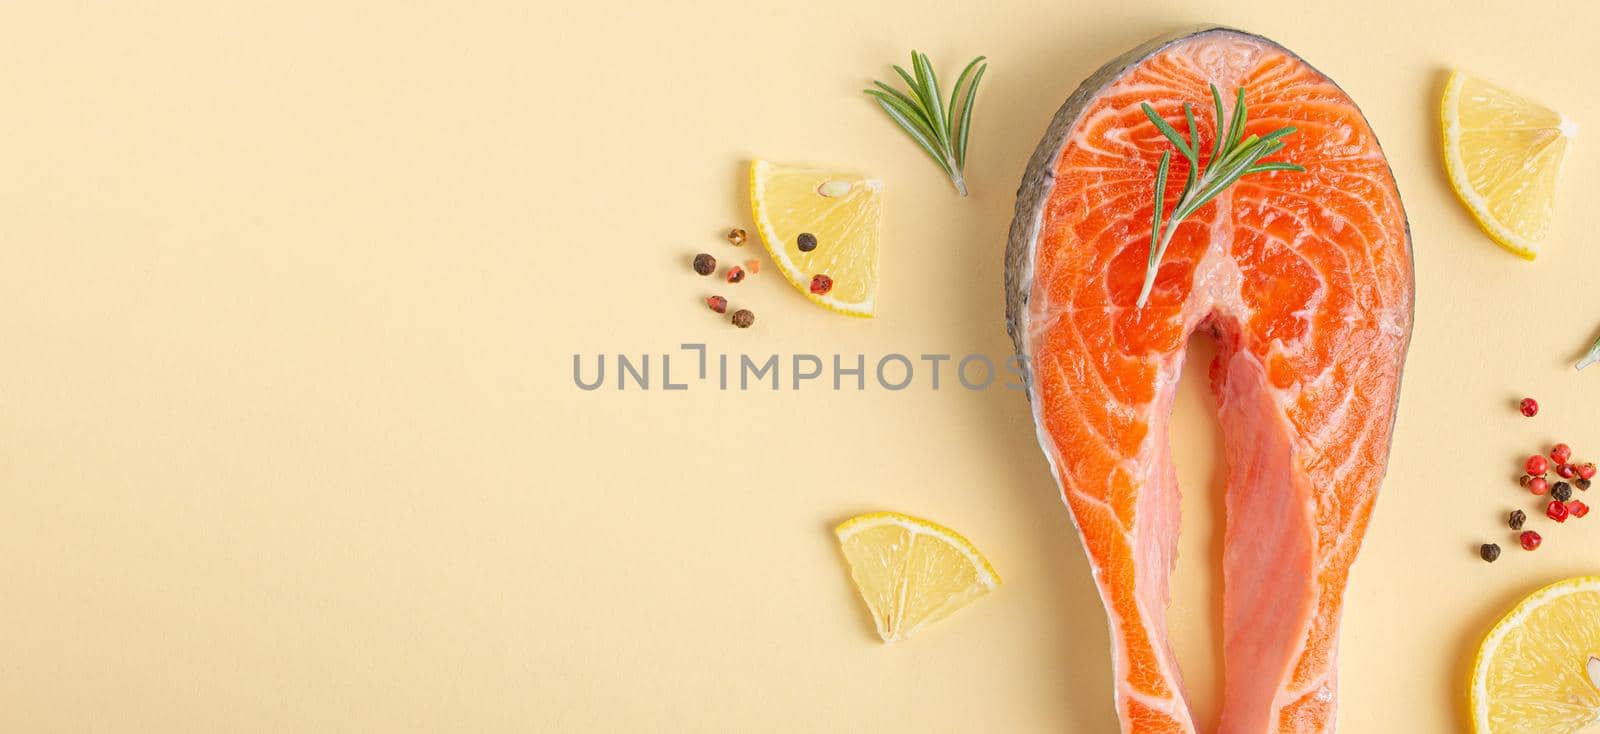 Uncooked raw fresh fish salmon steak top view on beige pastel background with rosemary, lemon wedges and spices, delicacy healthy fish cooking and nutrition concept flat lay space for text